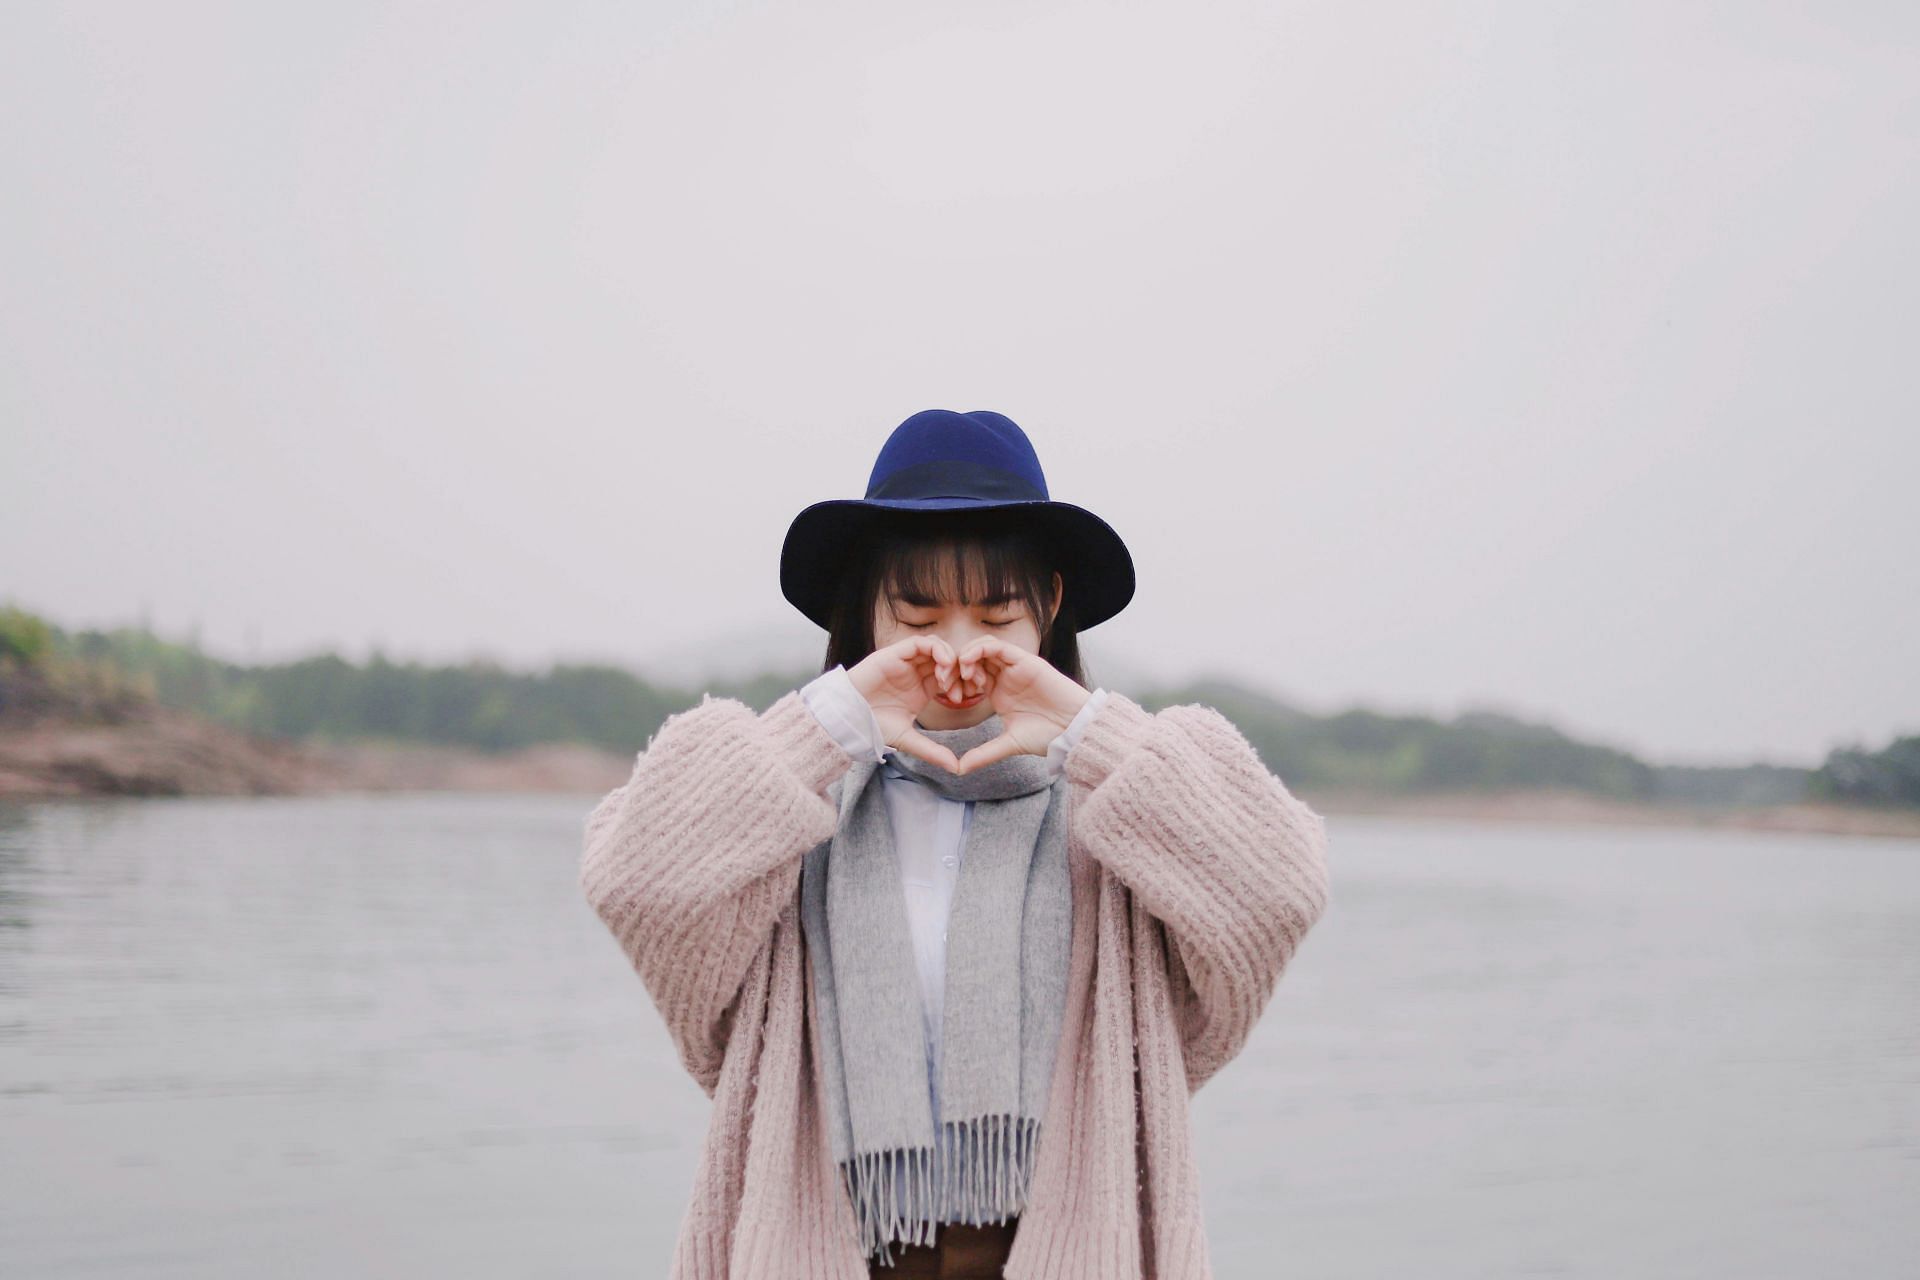 Are you ready to join the self-love club? Here are tips of self-validation. (Image via Unsplash/ Raychan)